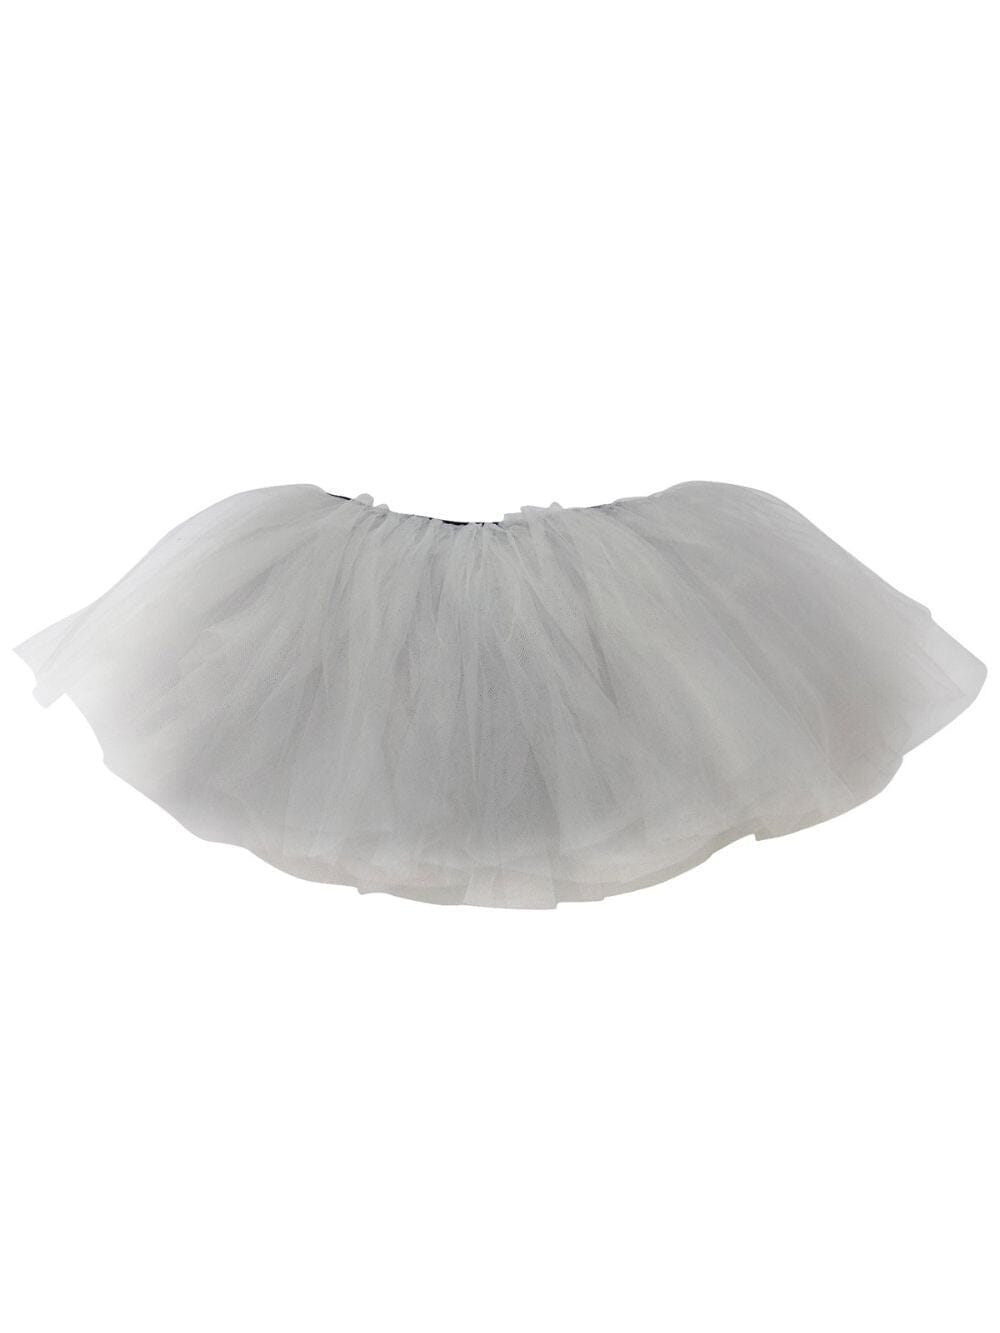 Silver - 5 Layer Tutu Skirt for Running, Dress-Up, Costumes - Sydney So Sweet